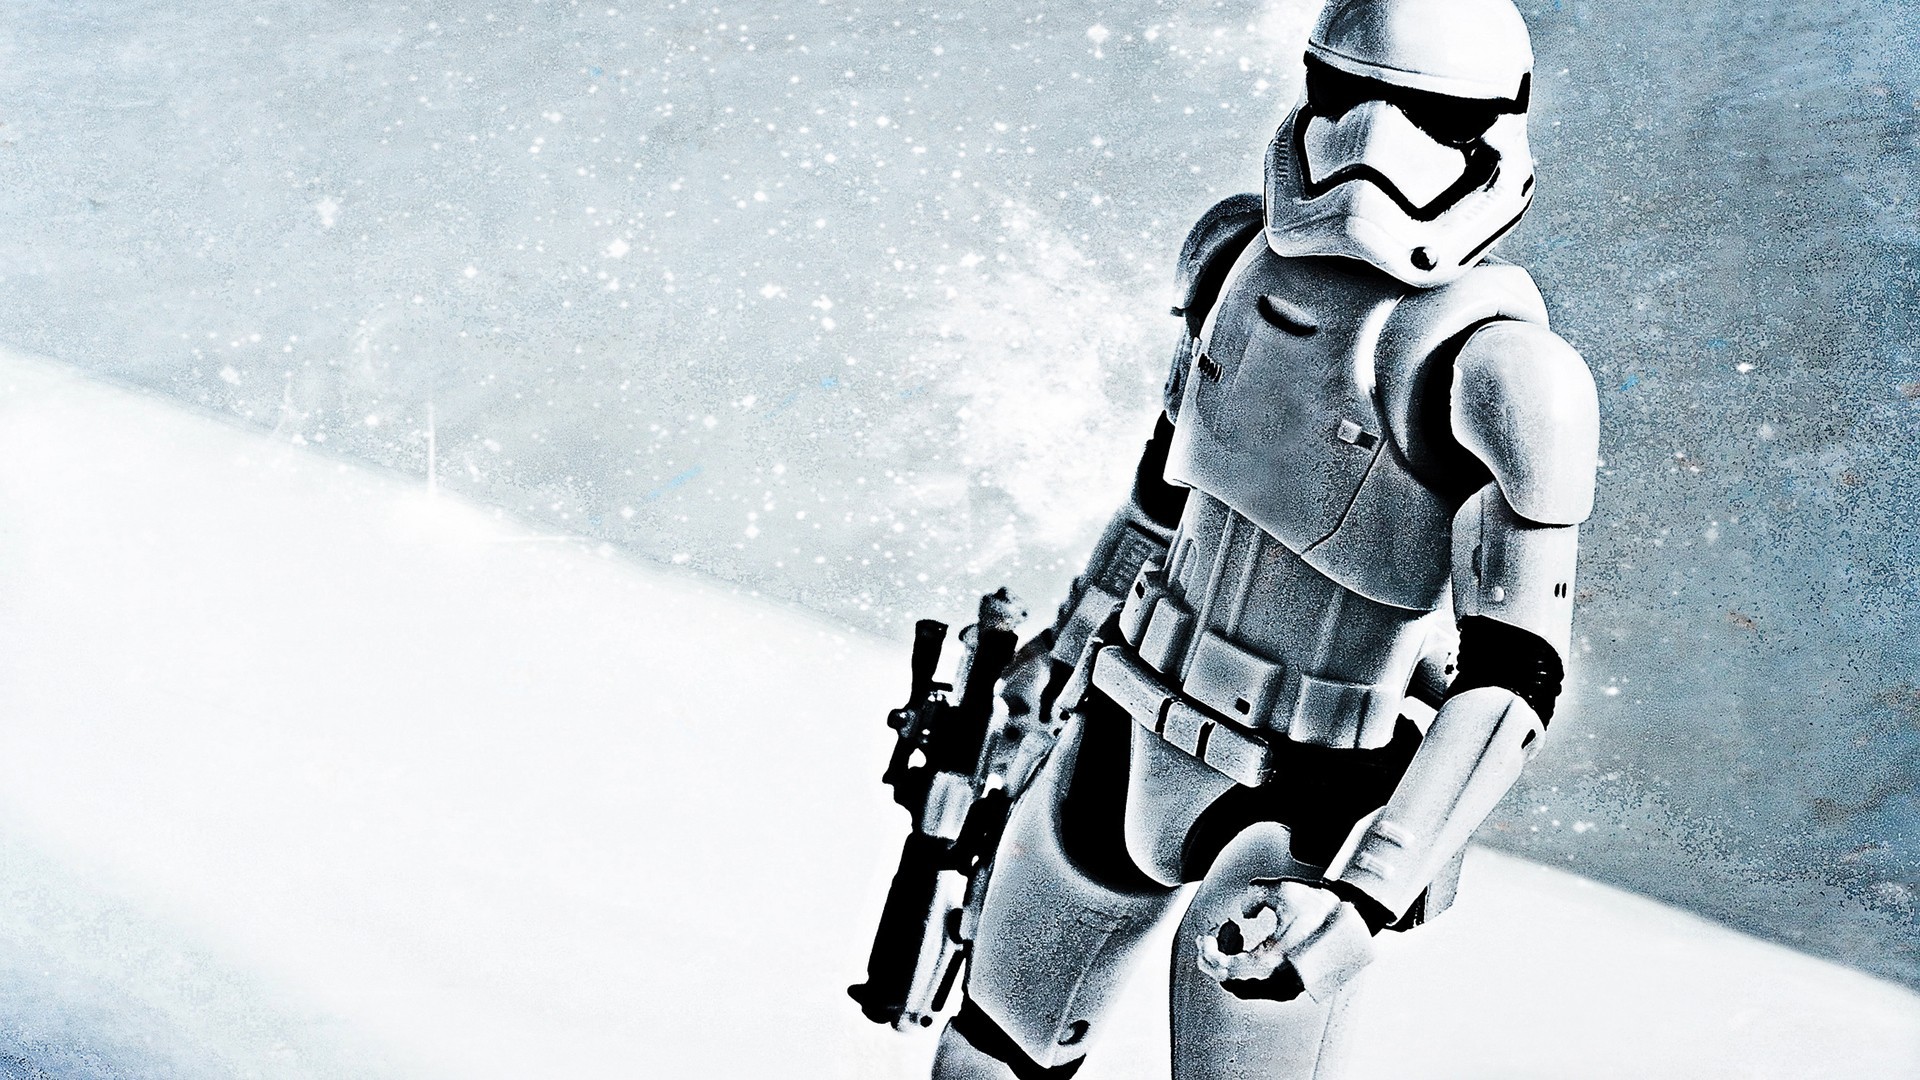 Stormtrooper Wallpapers Images Photos Pictures Backgrounds